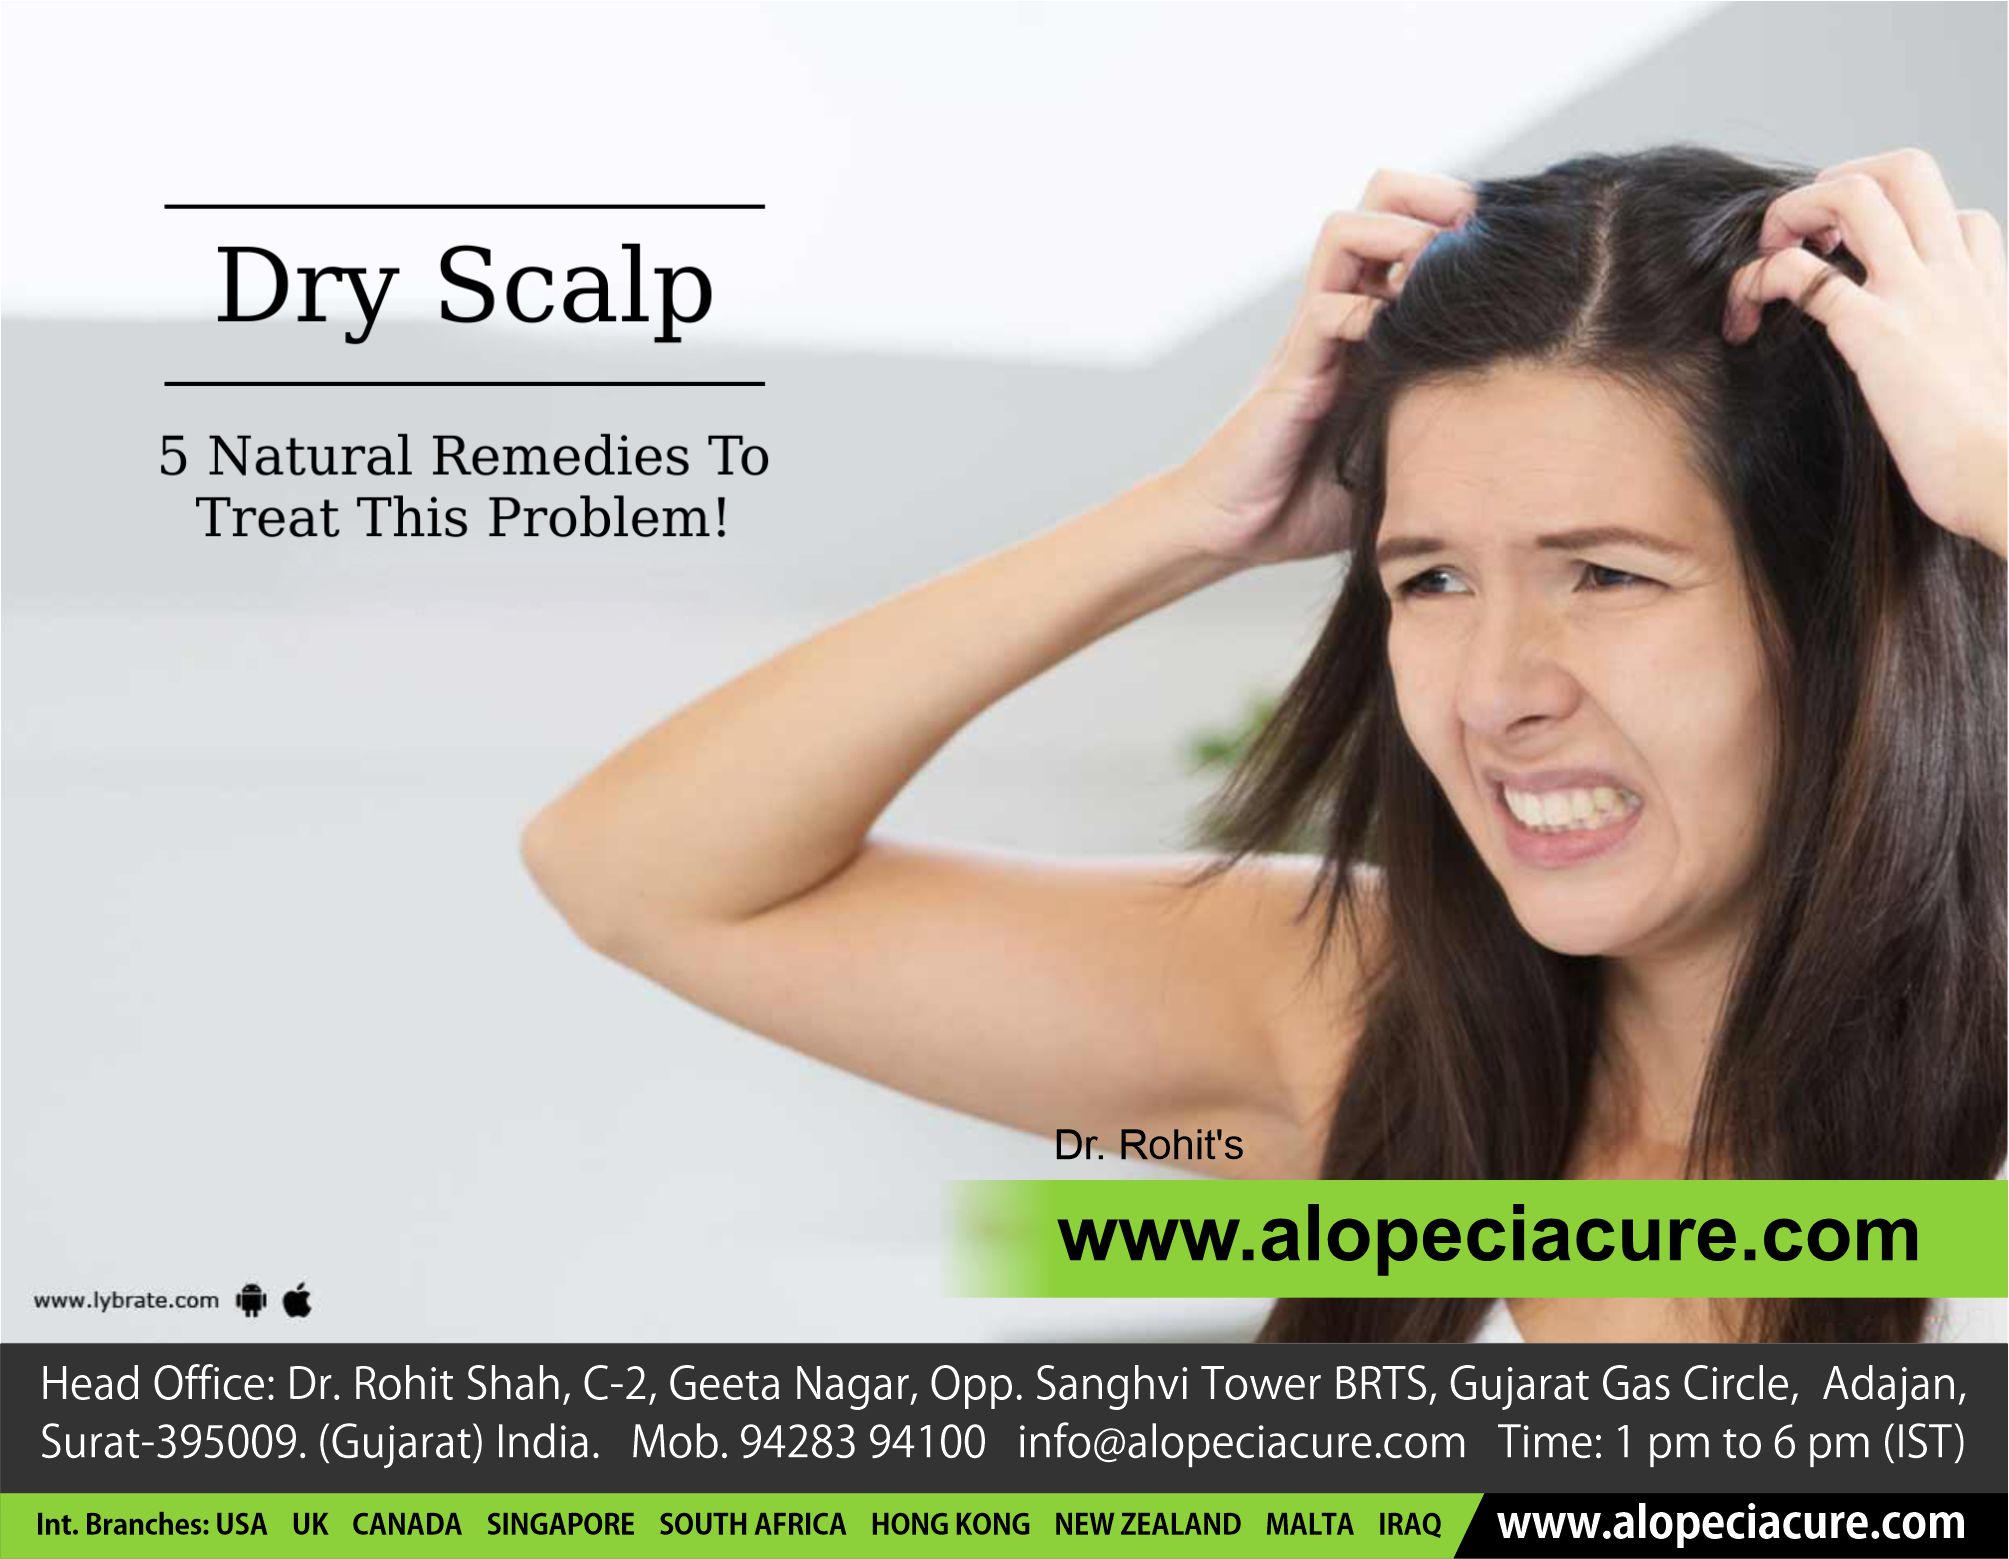 Dry Scalp - 6 Natural Remedies To Treat This Problem!